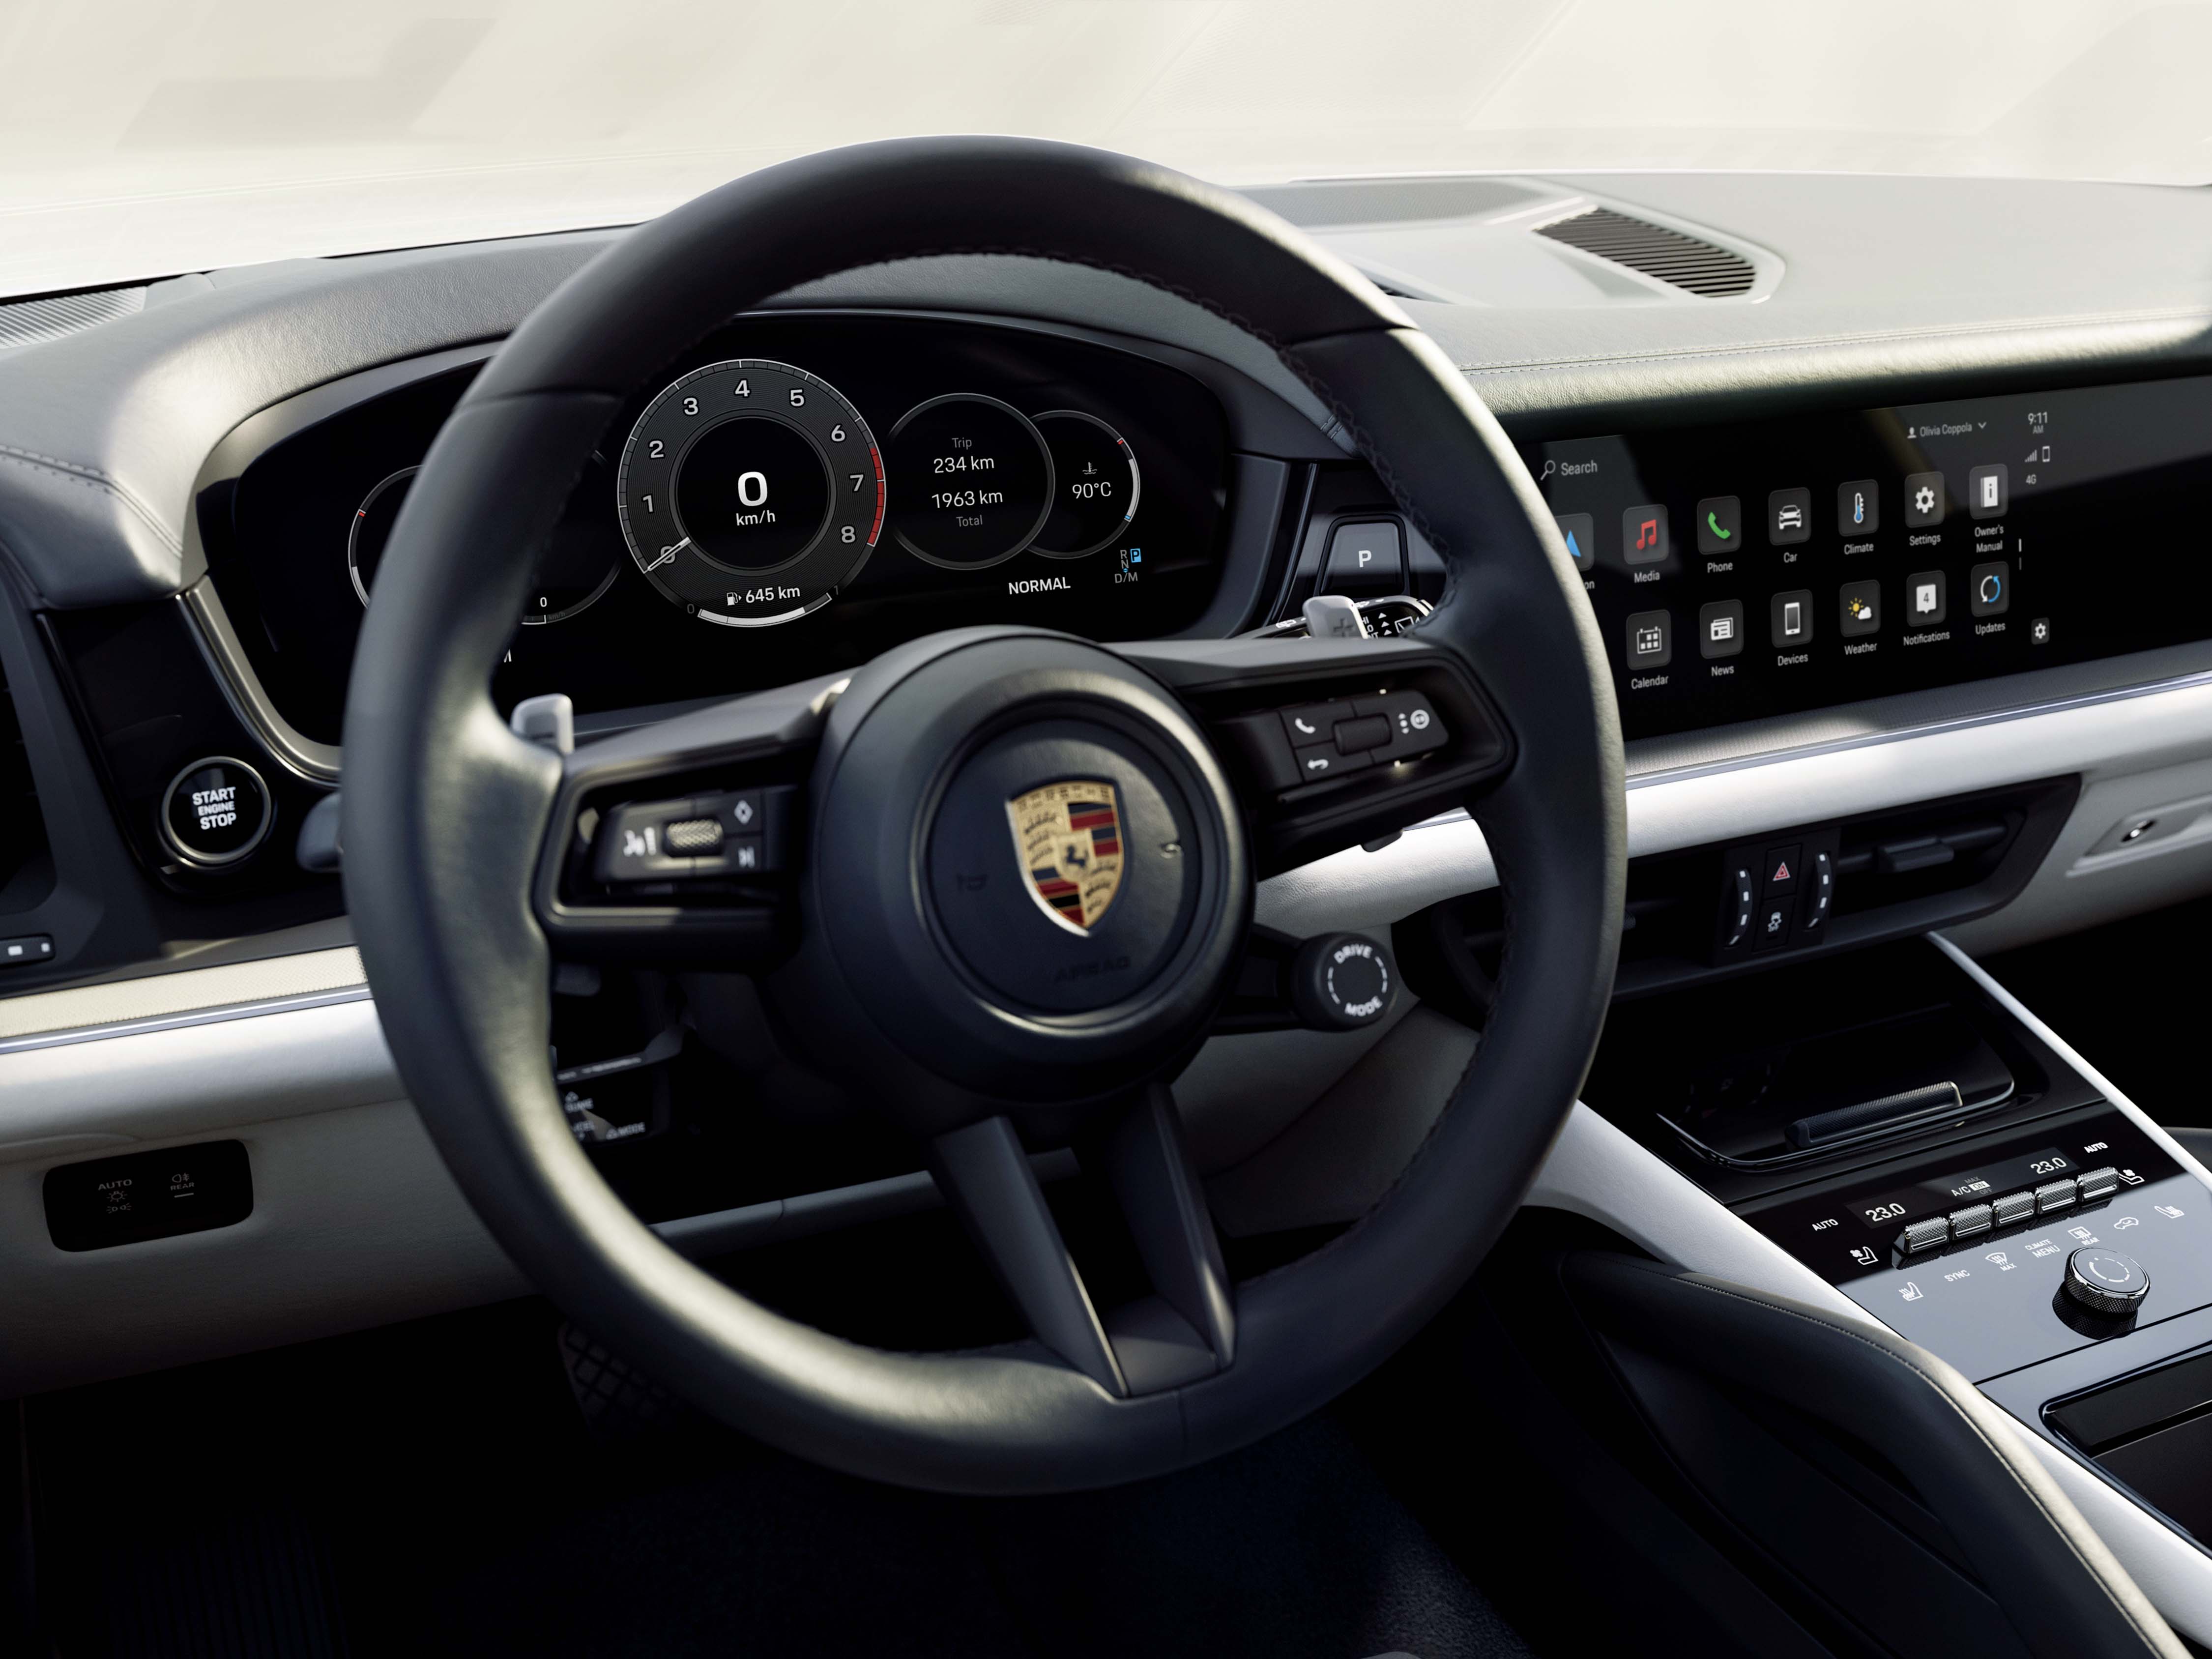 New Porsche Cayenne interior showing steering wheel and driver display